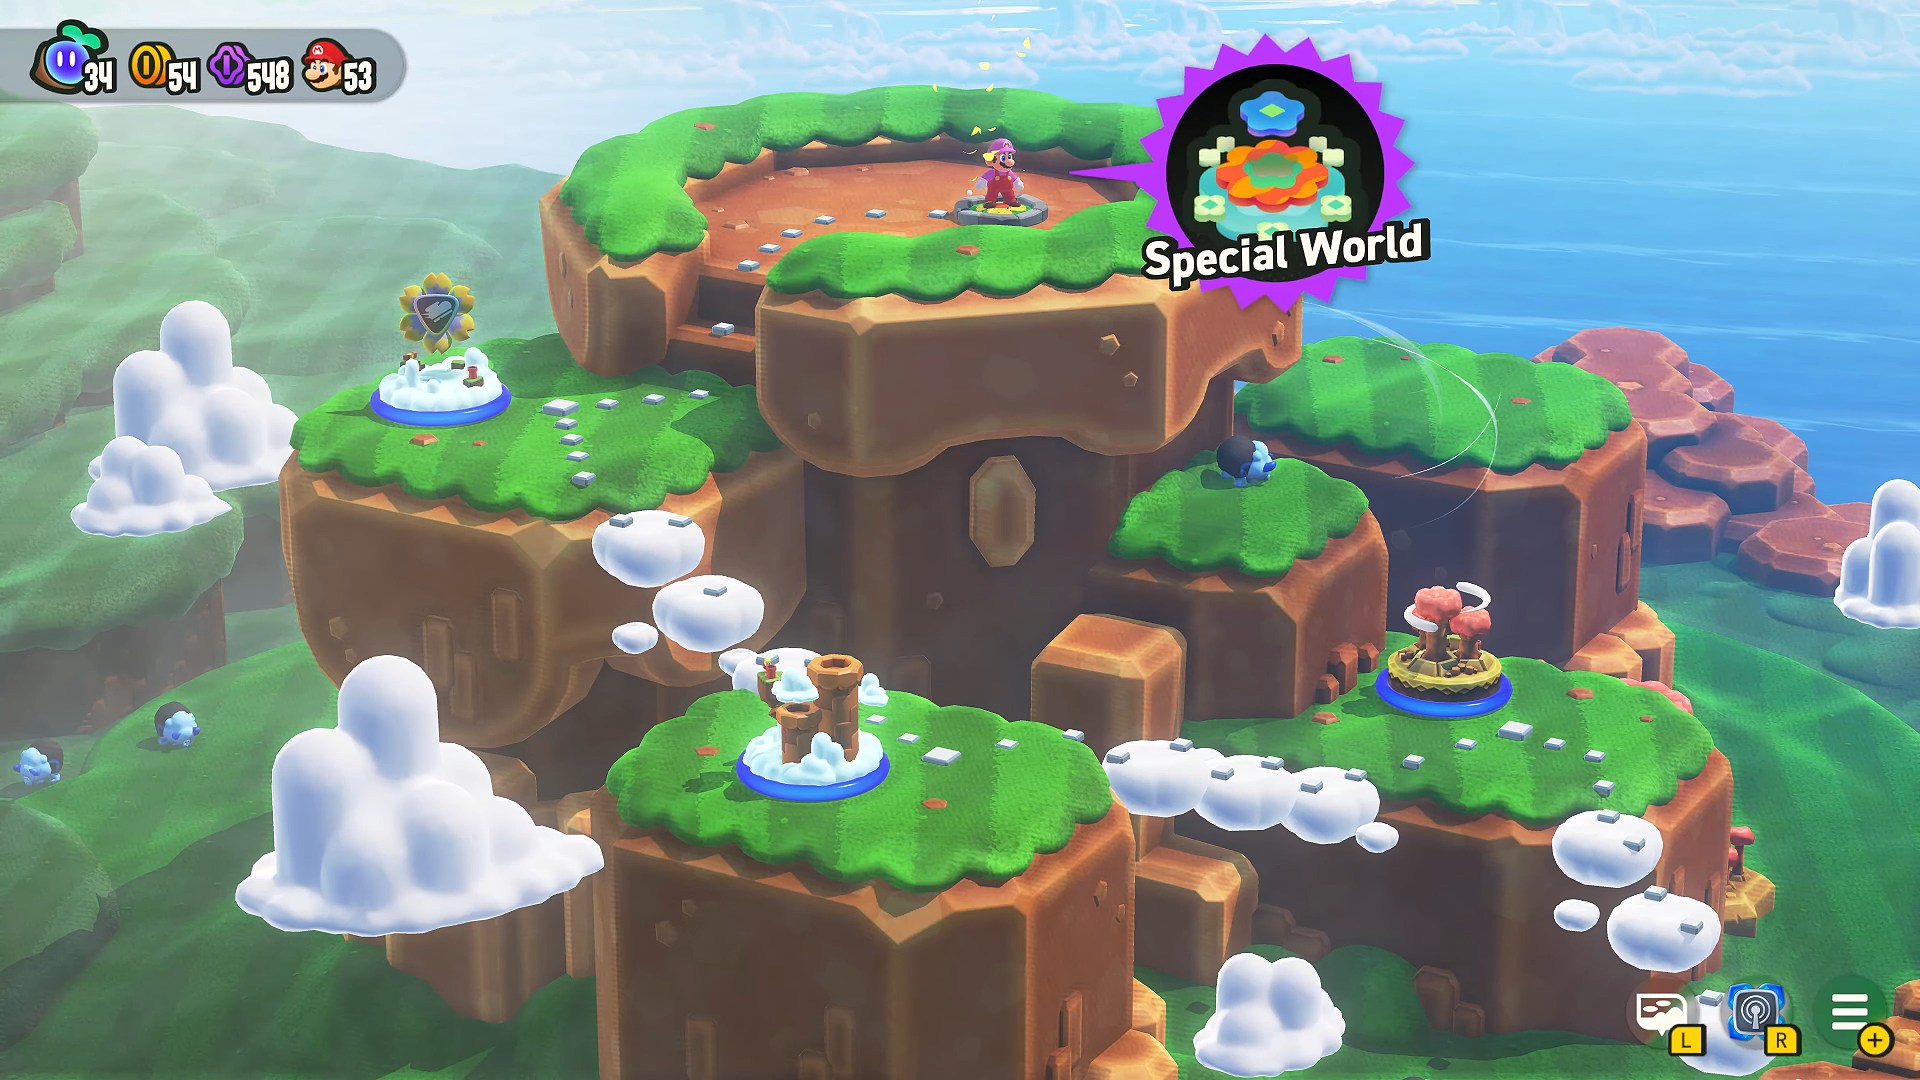 The Special World entrance in Pipe-Rock Plateau in Super Mario Bros. Wonder